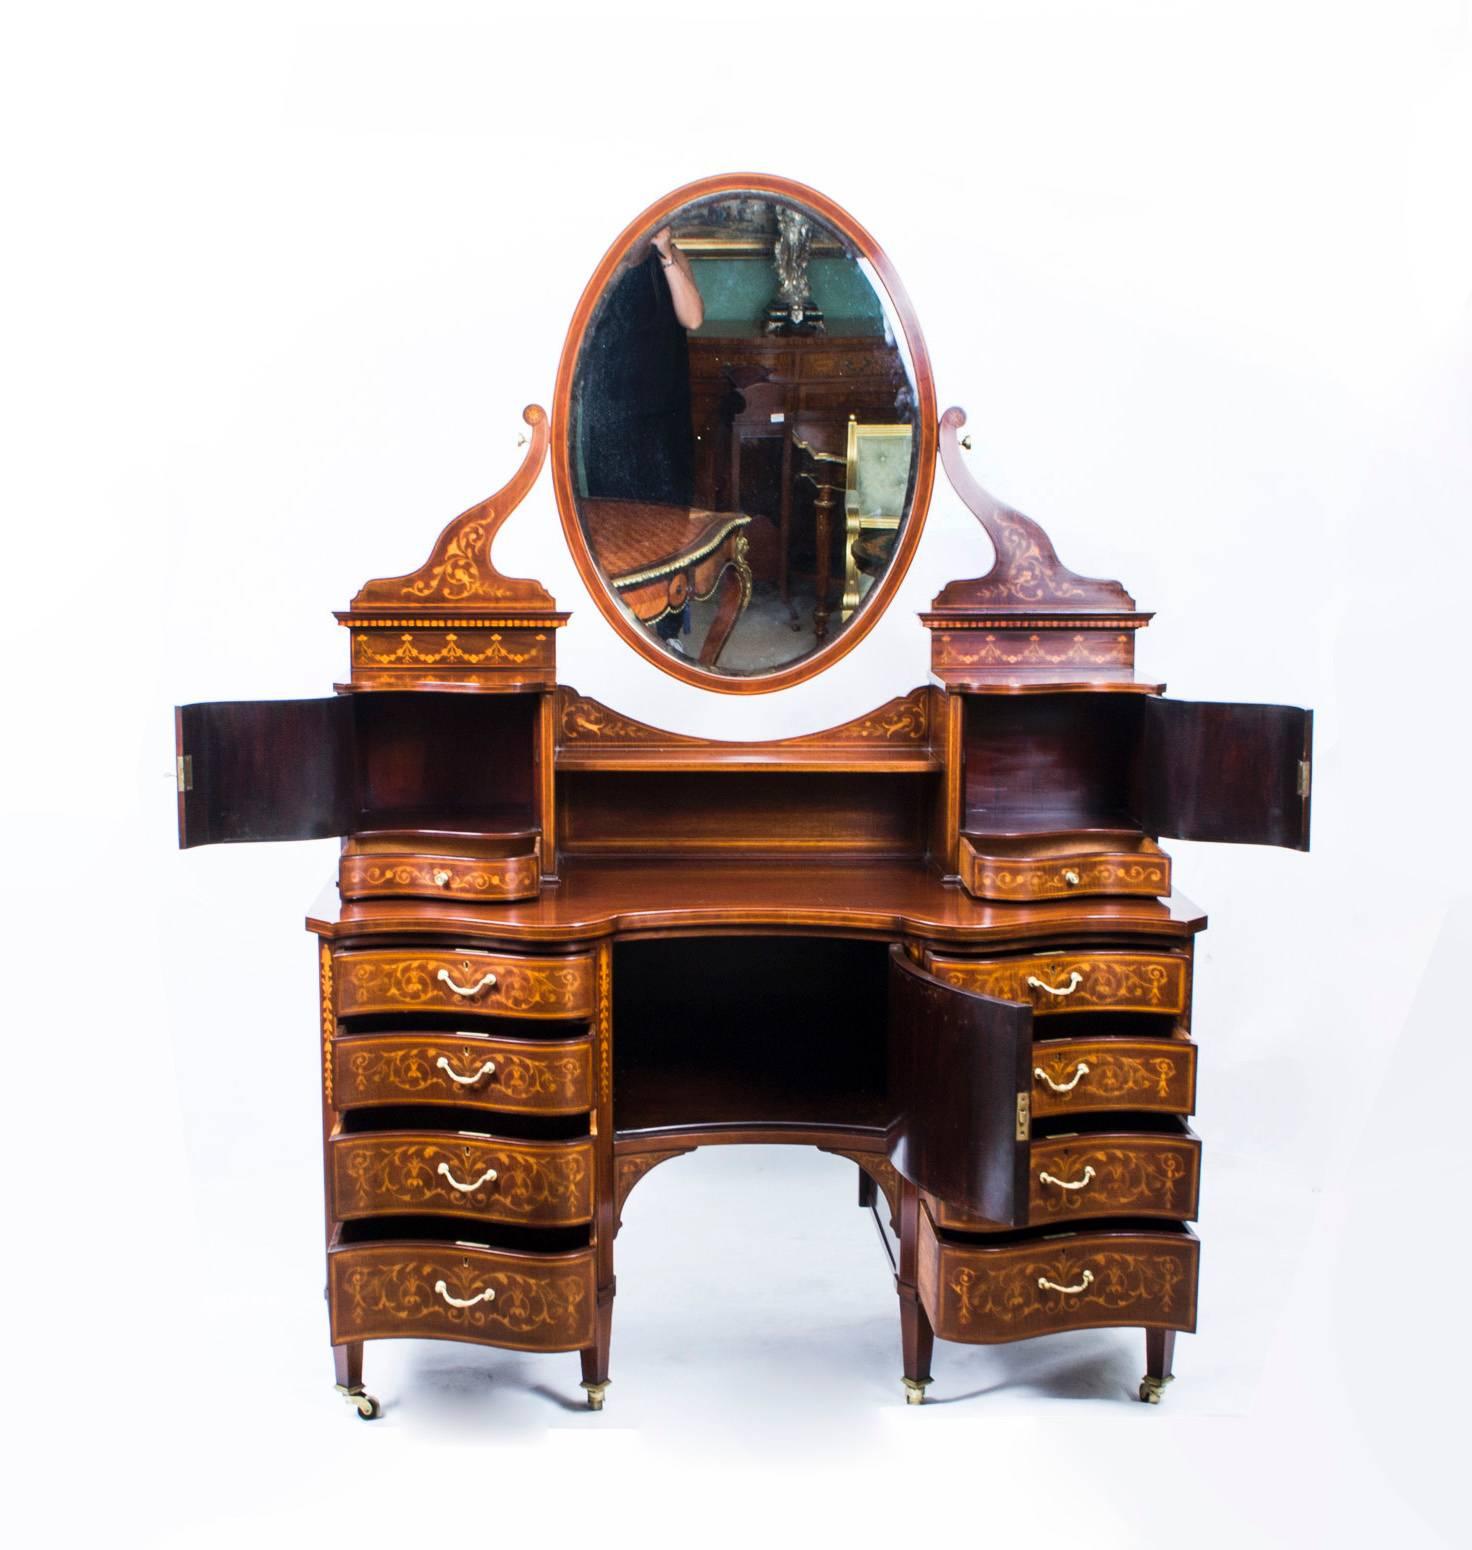 This is a spectacular antique late Victorian mahogany and floral marquetry dressing table by the renowned cabinet maker and retailer Edwards & Roberts, circa 1880 in date.

It is inlaid with a beautiful marquetry of scrolls and foliage in